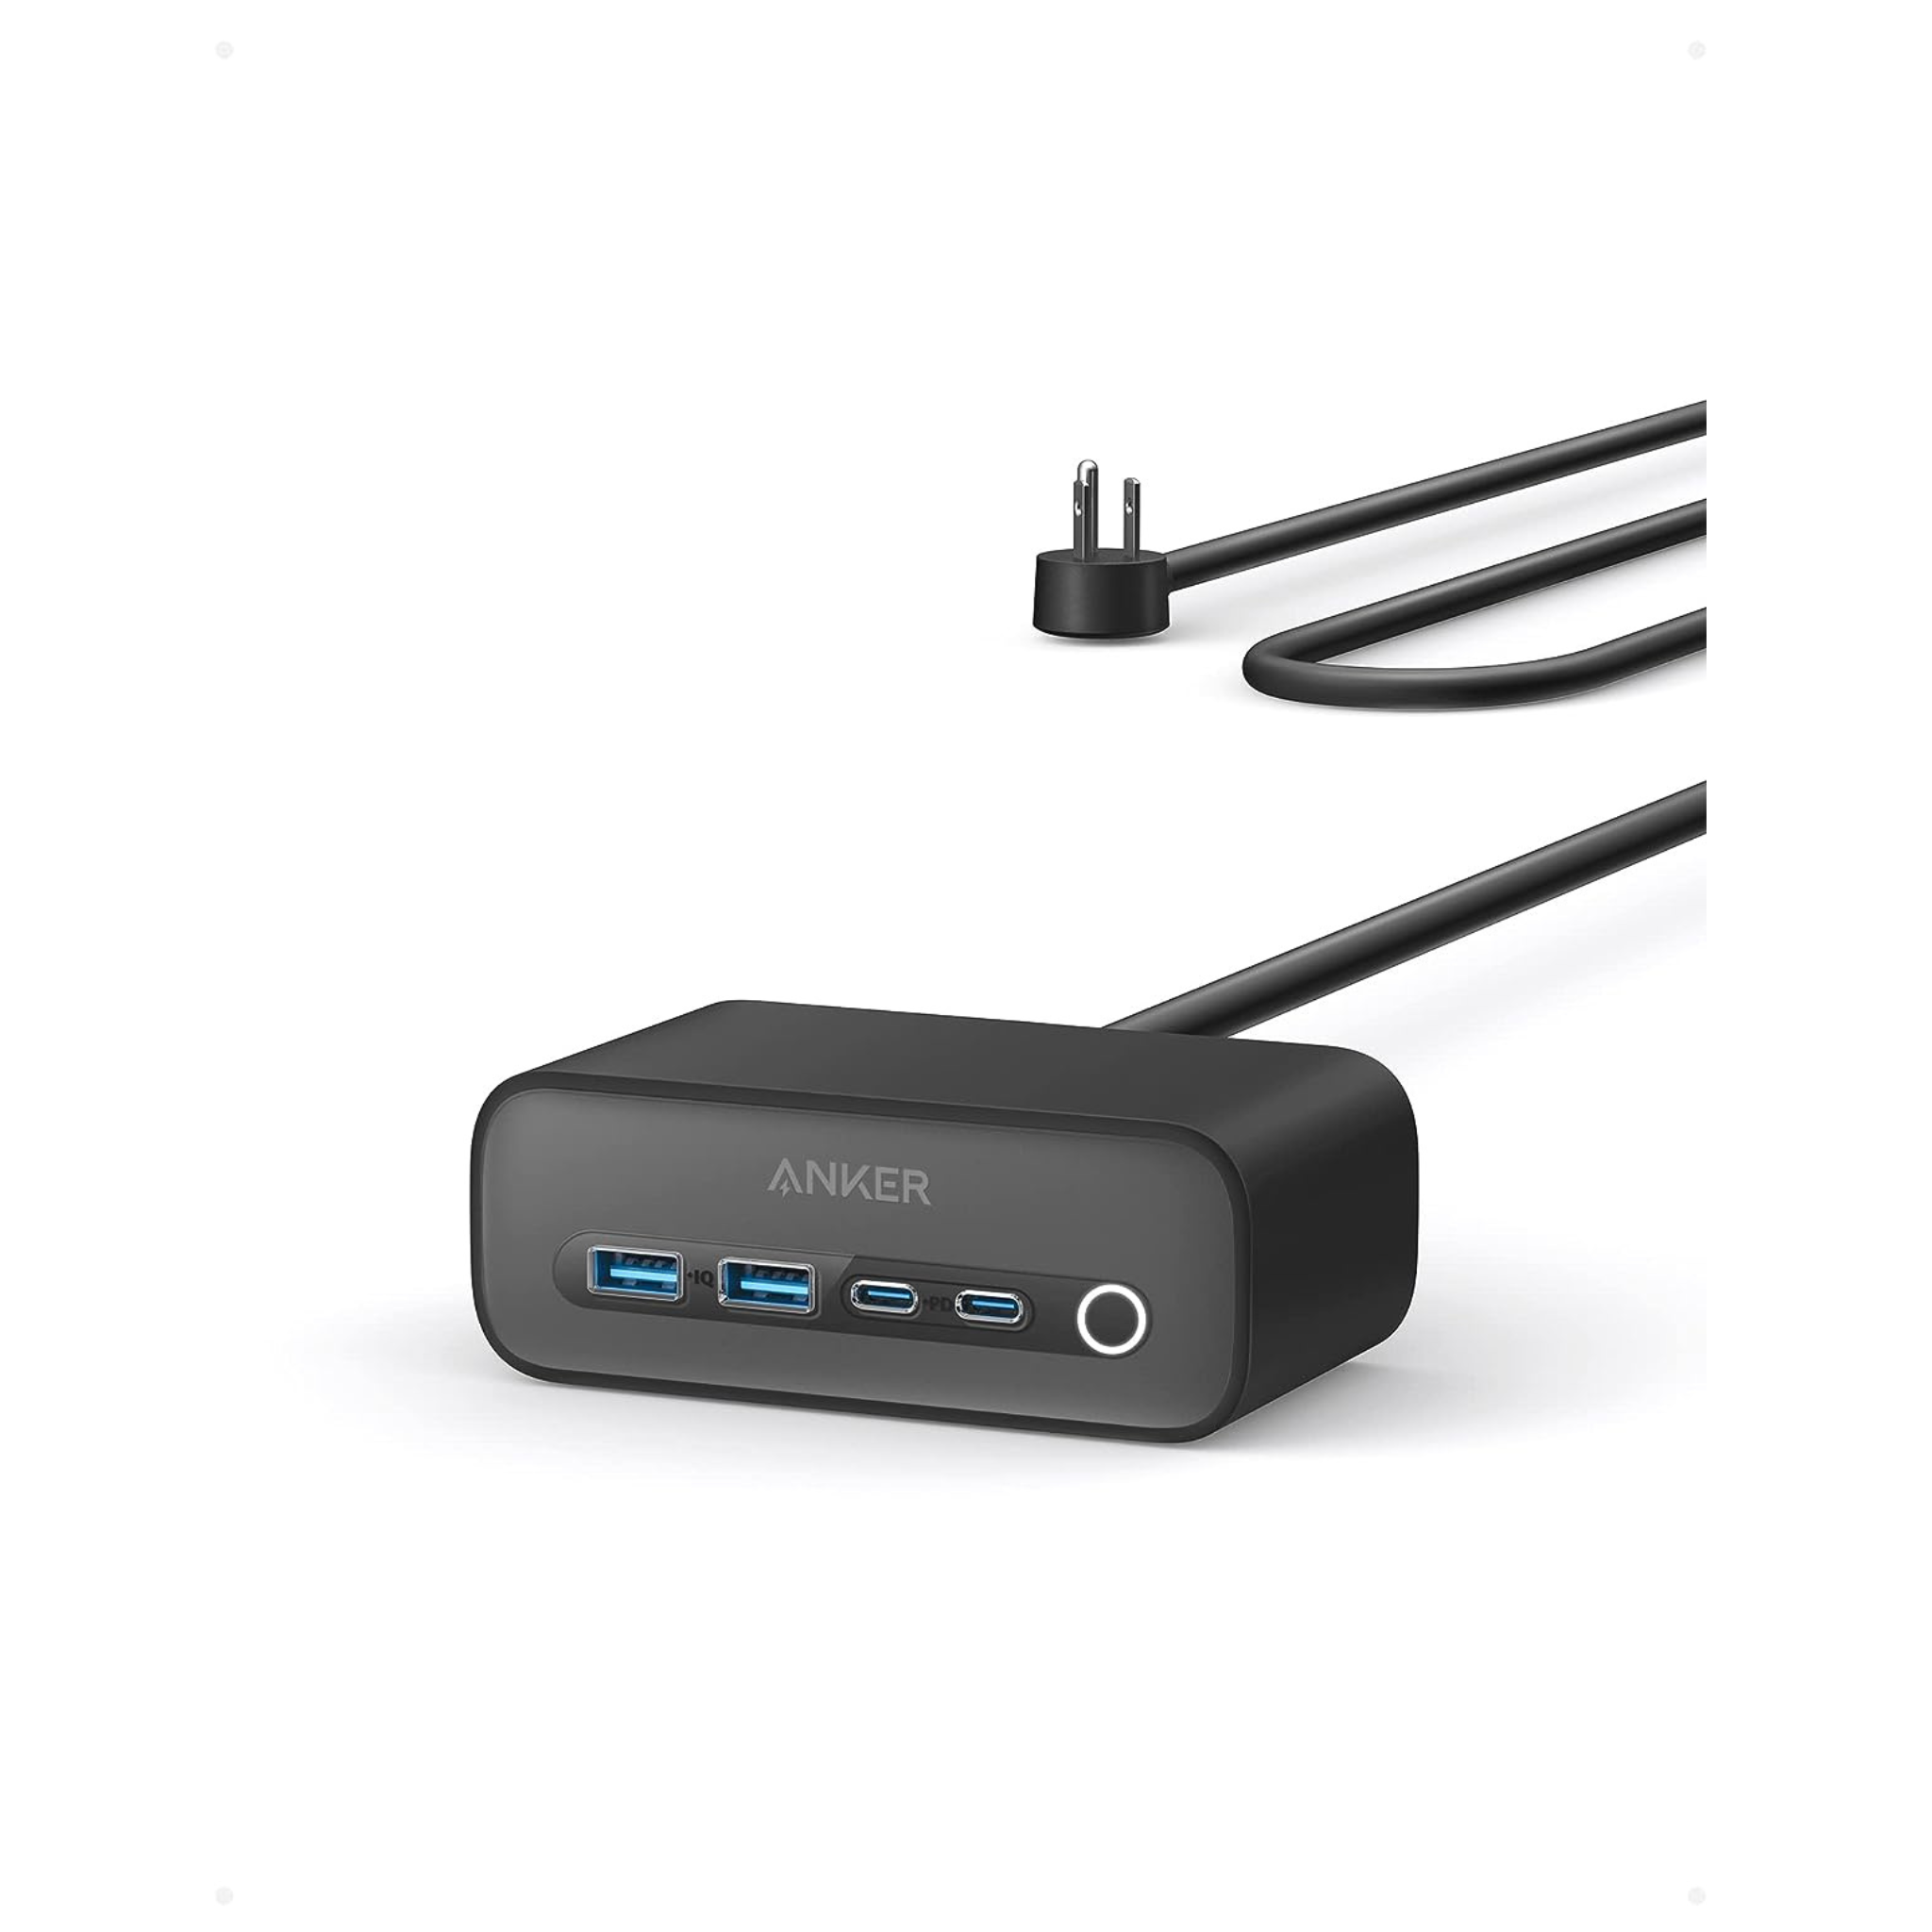 Anker 525 USB C Power Strip Charging Station With 5ft Extension Cord